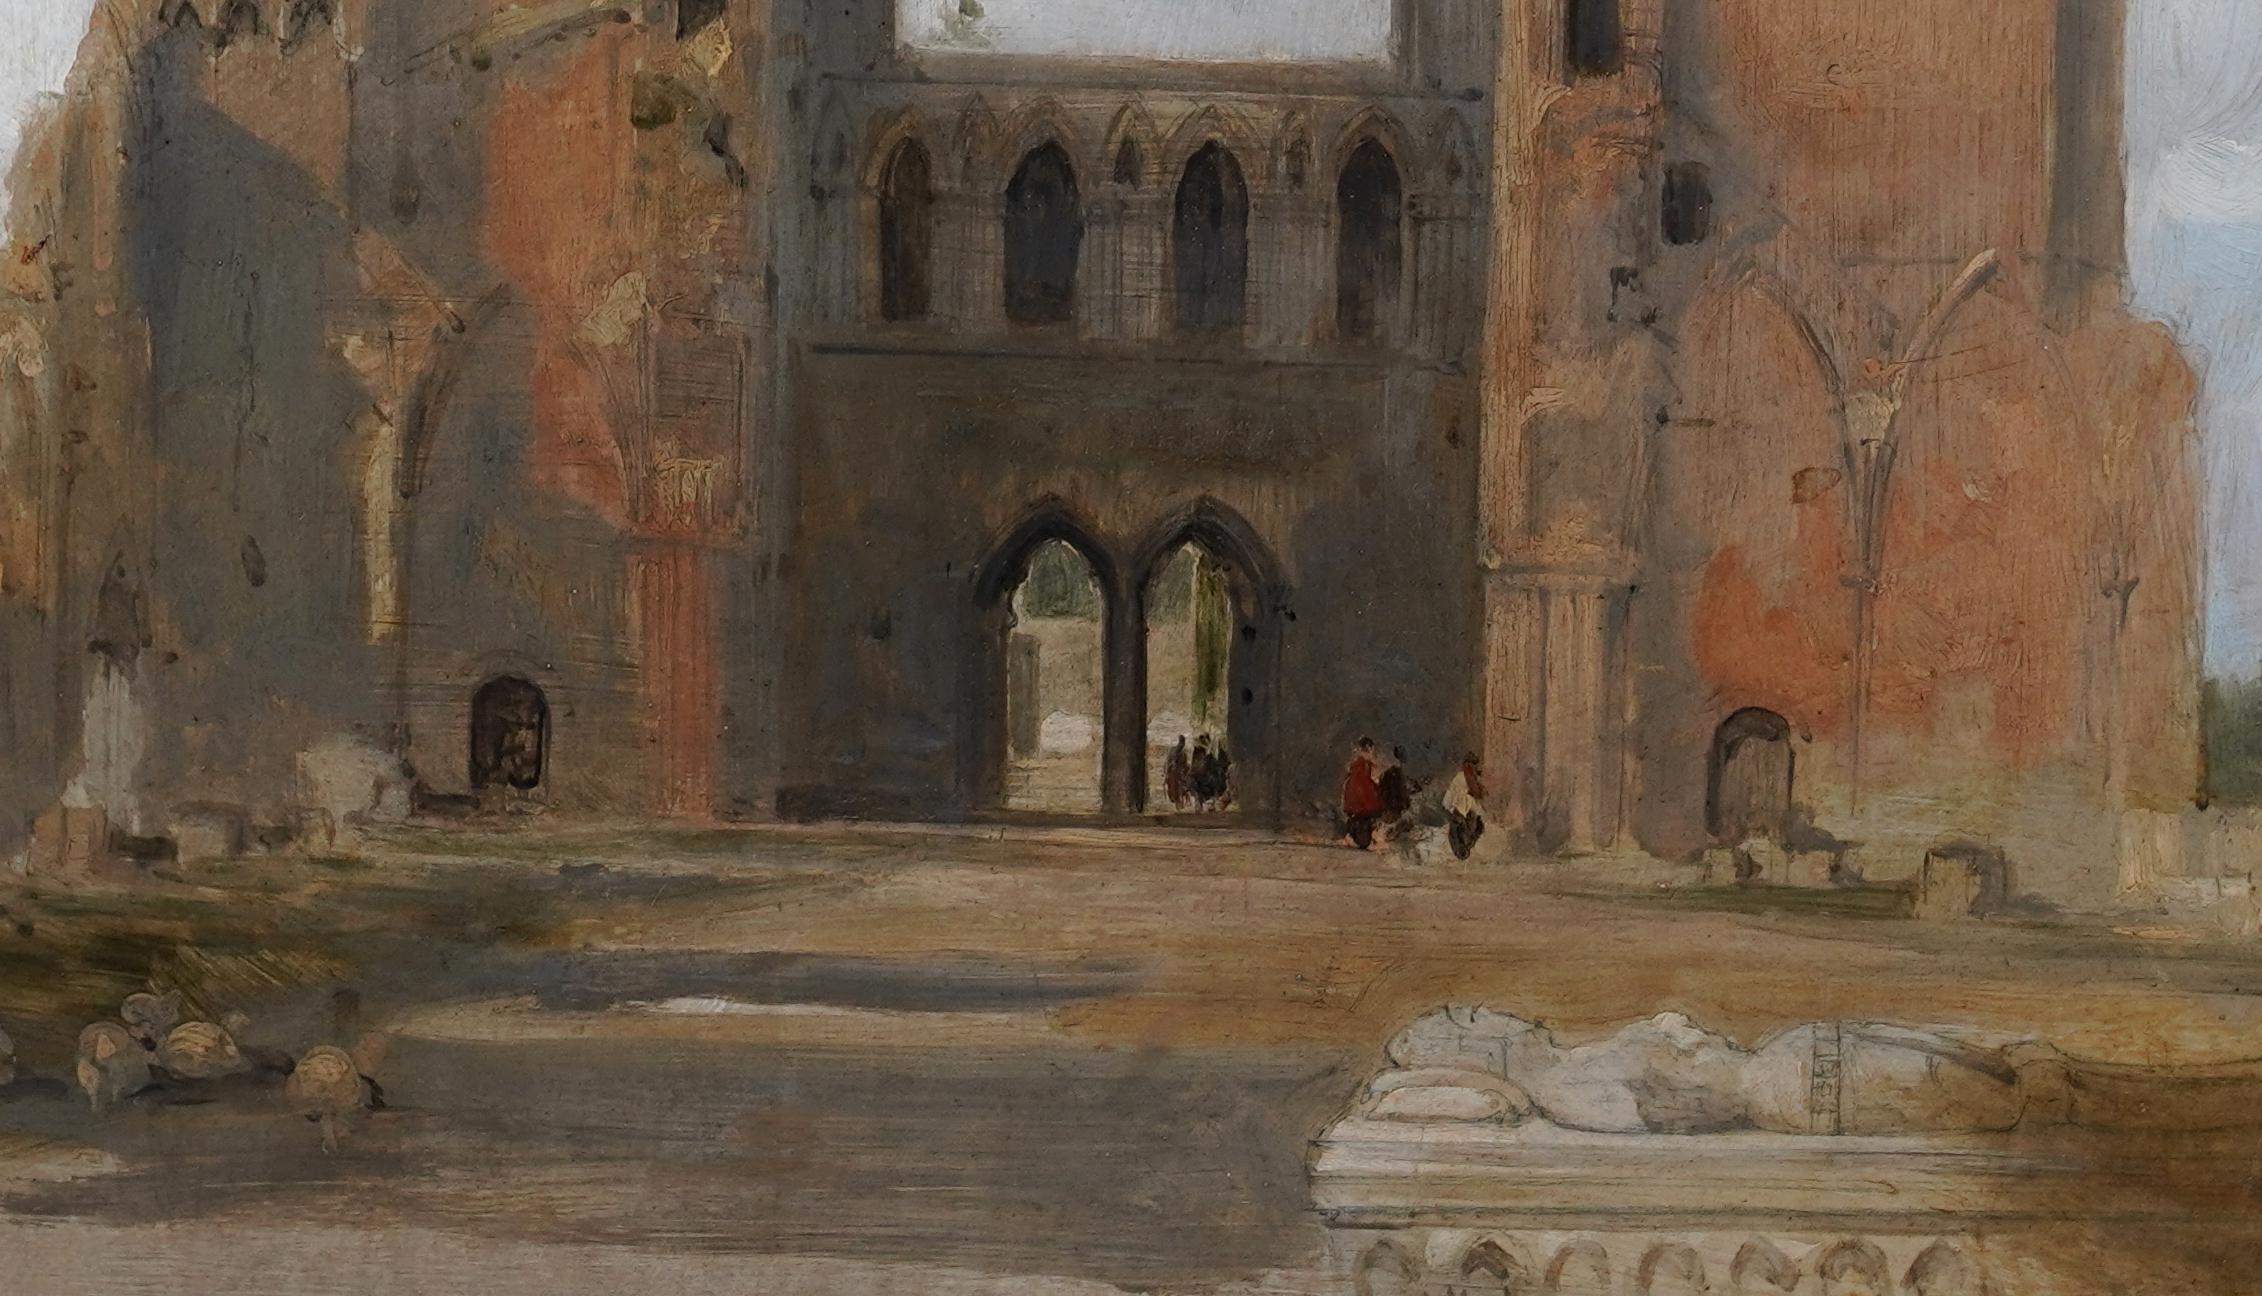 David Roberts, noted 19th century Scottish artist, painted this superb architectural landscape oil painting. Painted in 1848 it is the ruins at Elgin cathedral, a historic ruin in Elgin, Moray, north-east Scotland. The cathedral, dedicated to the